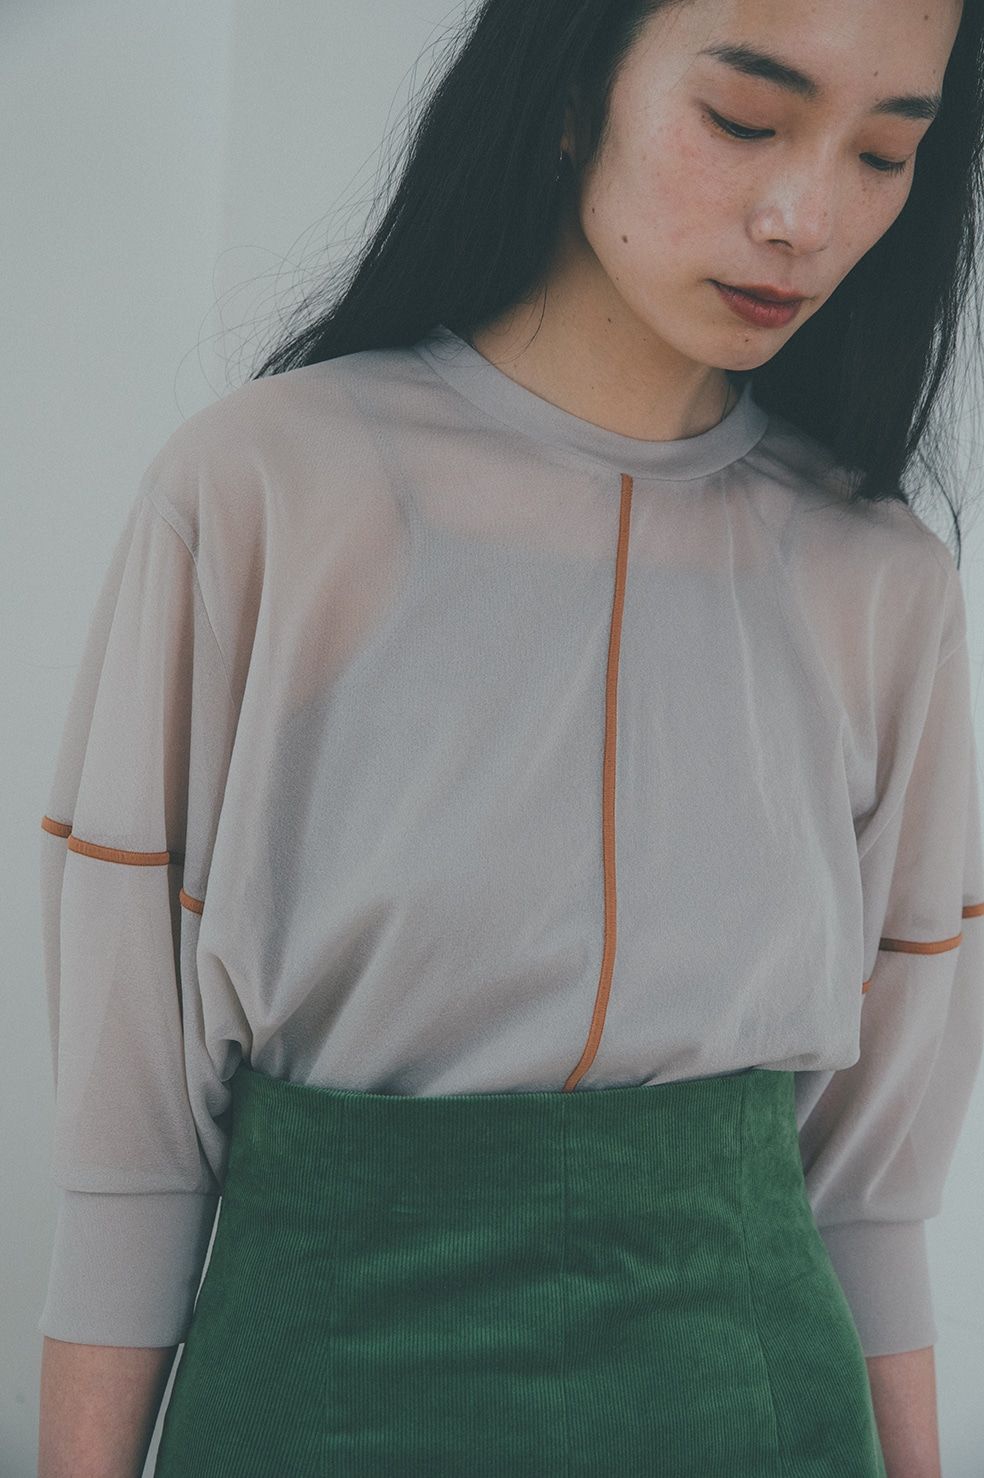 clane SOLID SLEEVE SHEER S/S TOPS